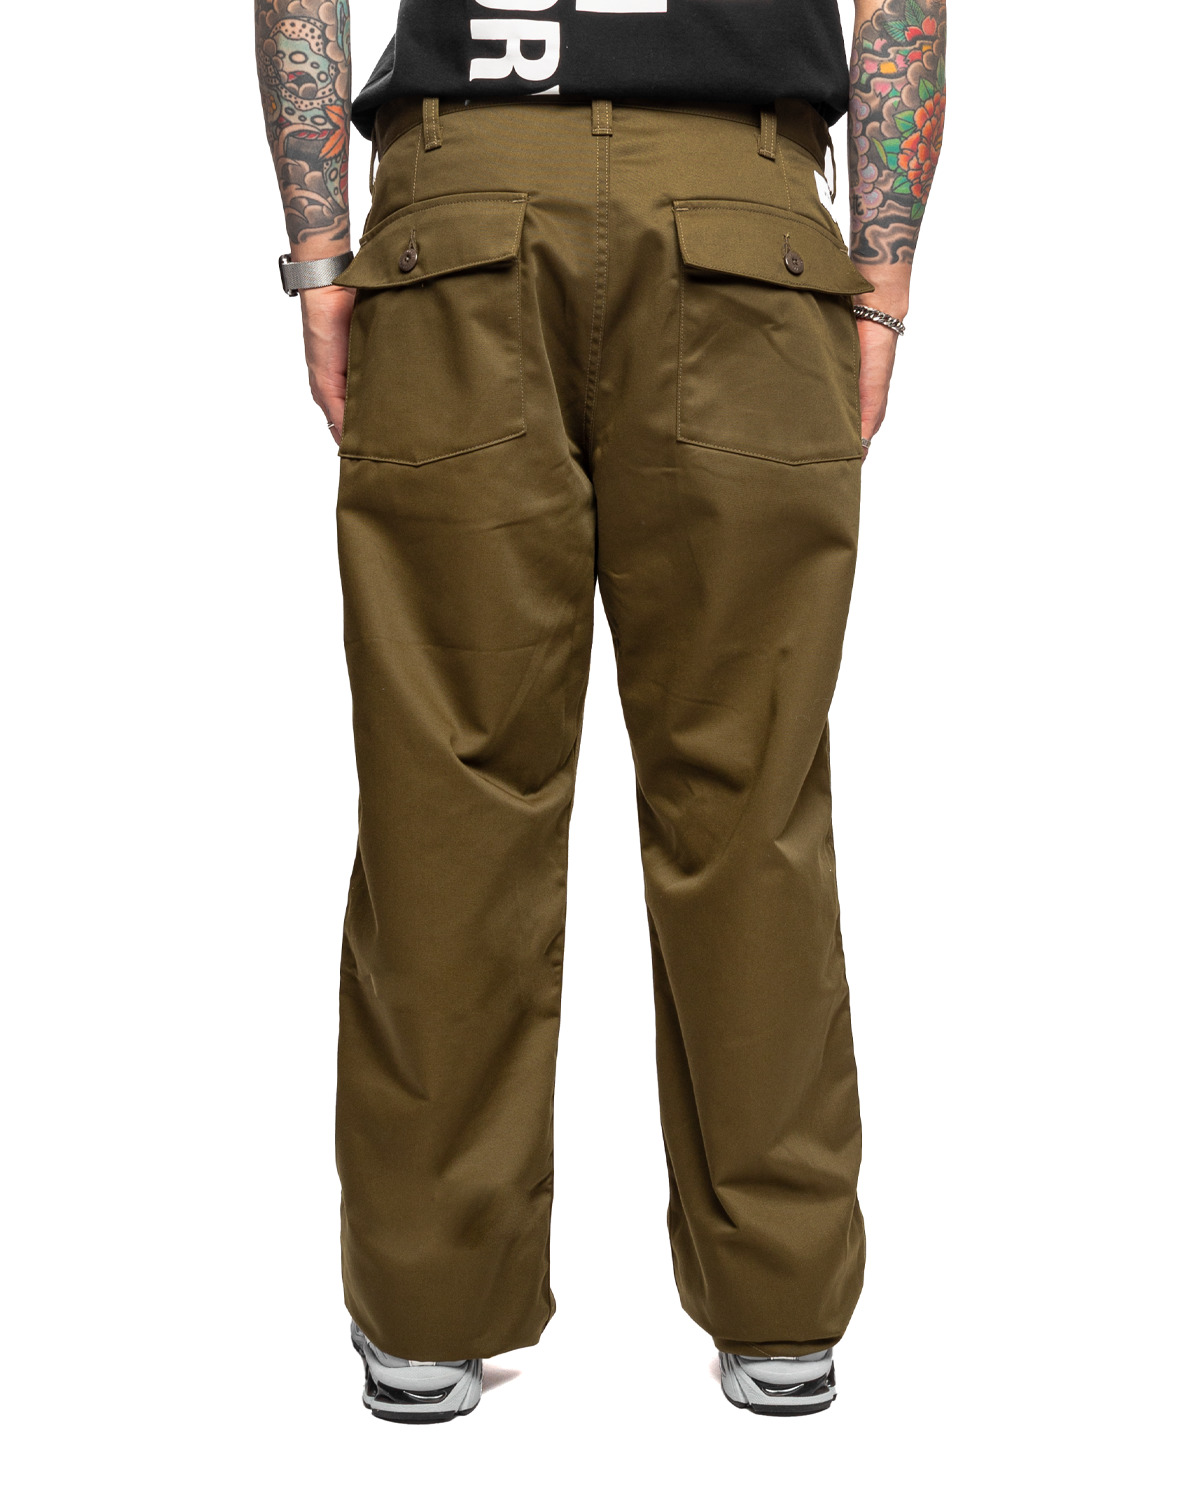 Trousers 05 Olive Drab - 3